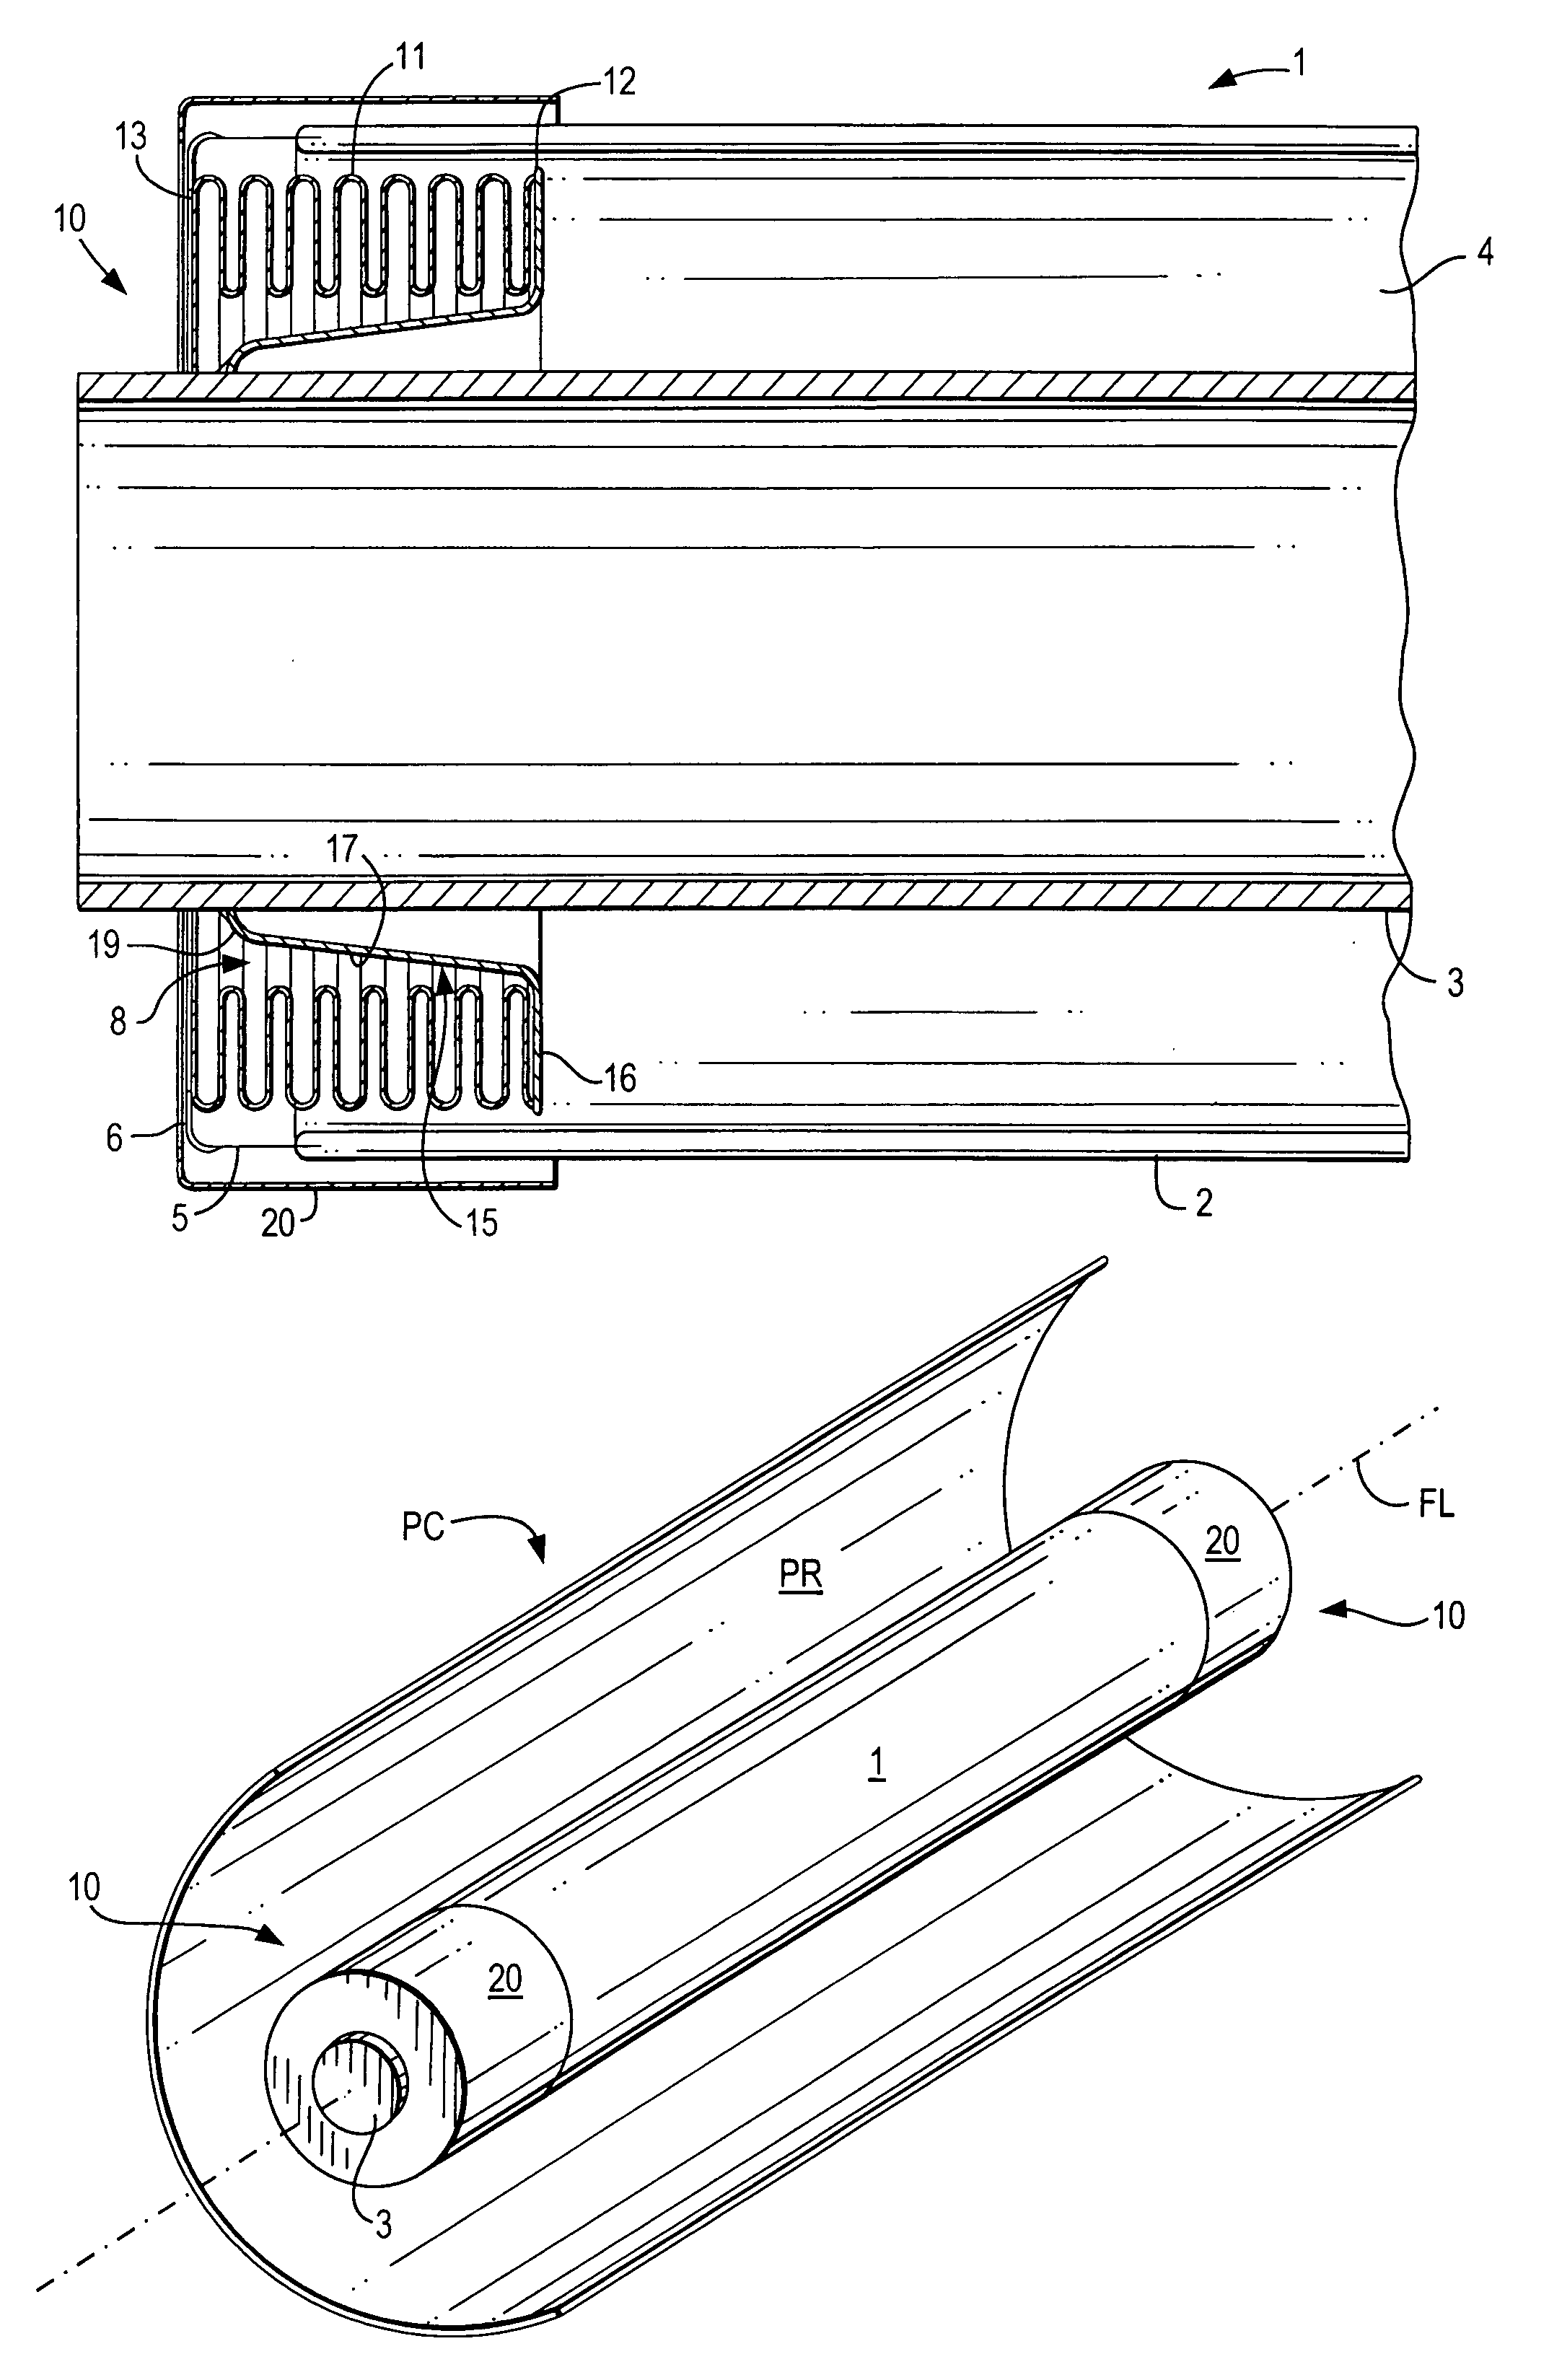 Absorber pipe for solar heating applications